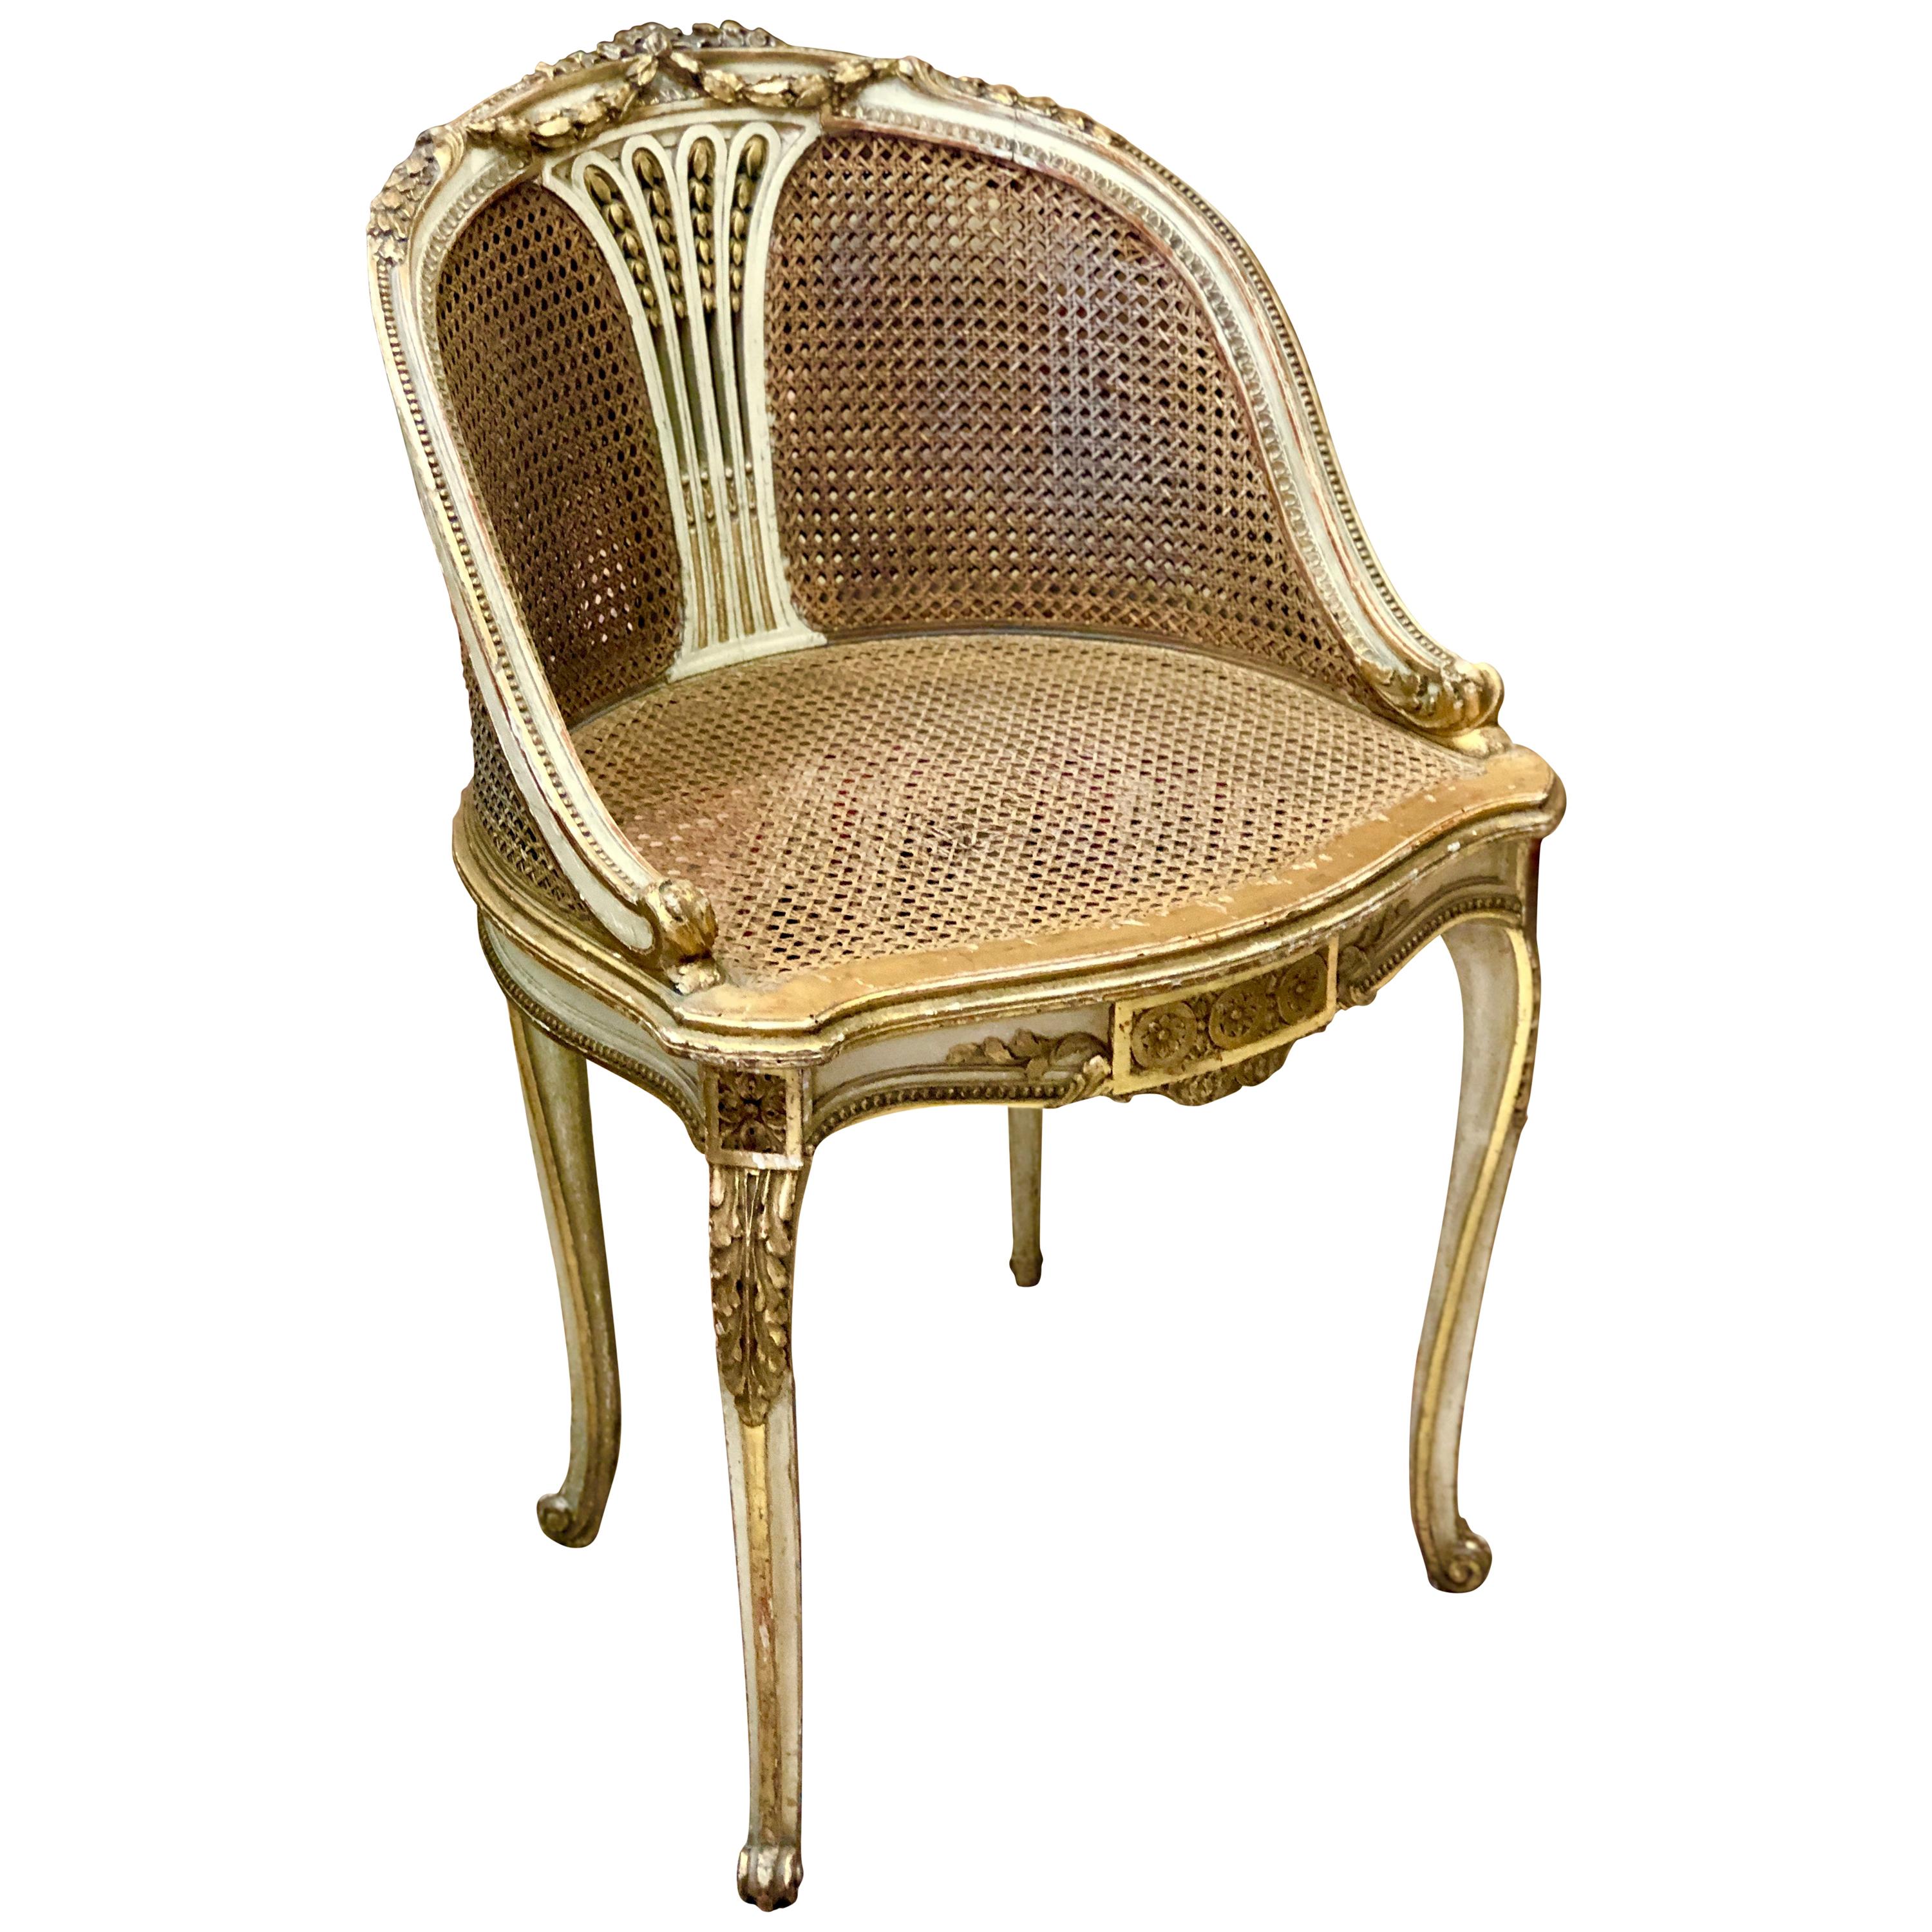 19th Century Petite French Ballroom Round Chair, in Louis XVI Style